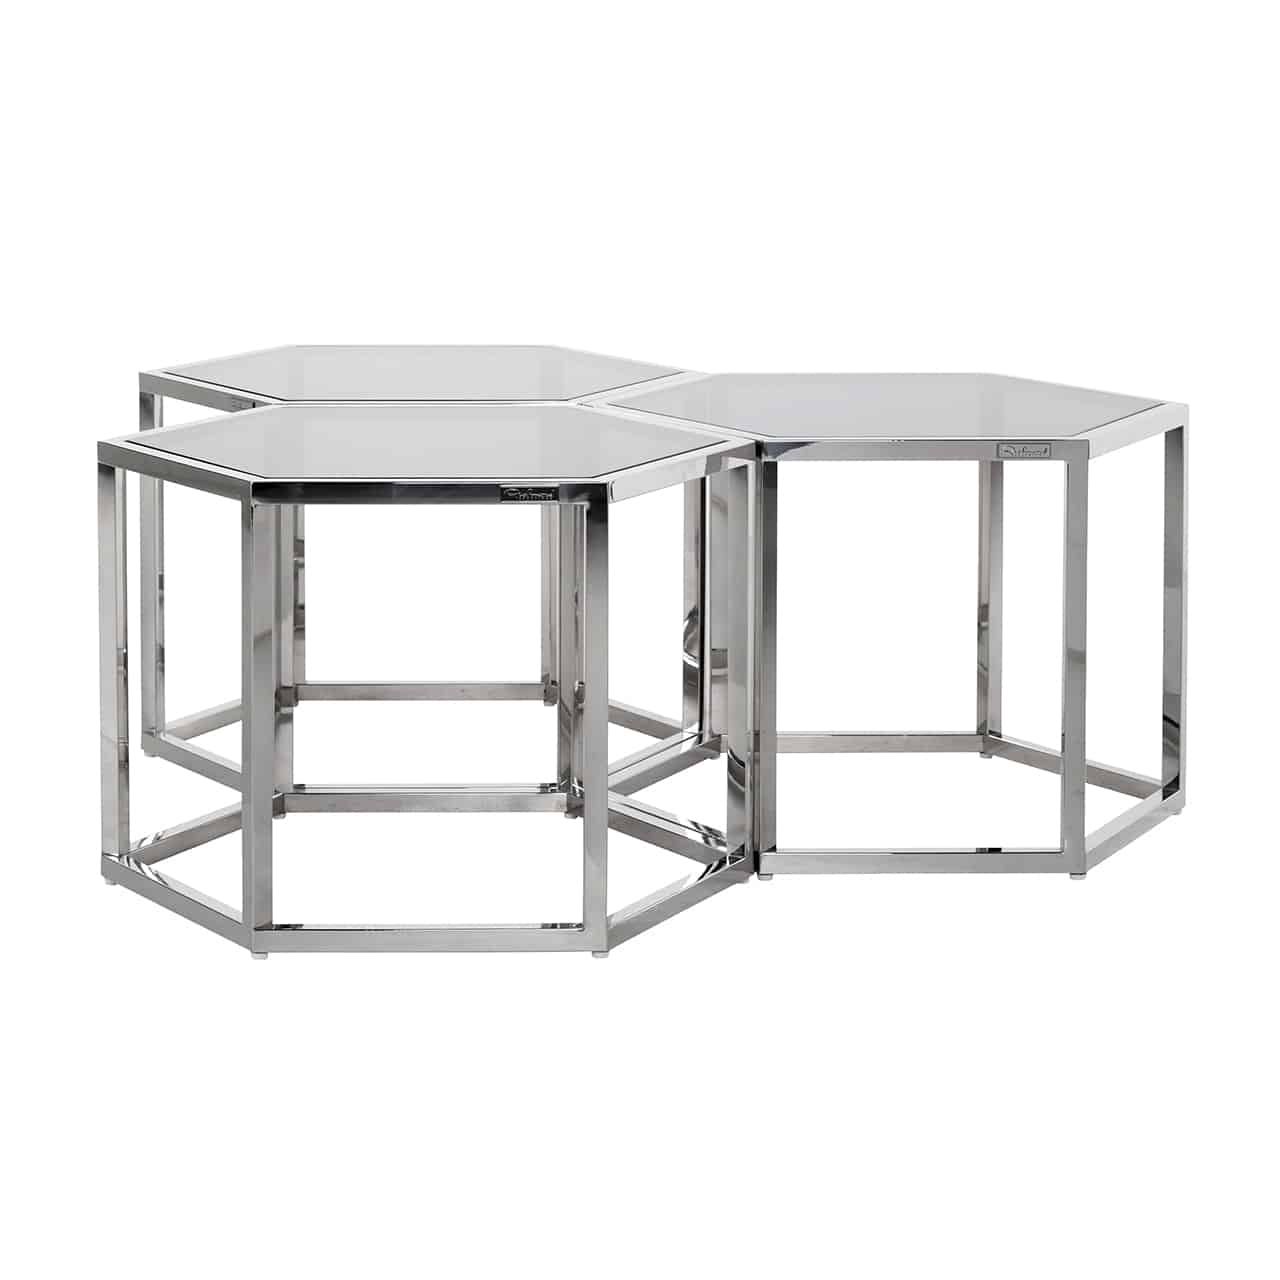 Coffee Tables Three Chrome | Chrome | Furnibay – Furniture Online With Chrome Coffee Tables (View 3 of 20)